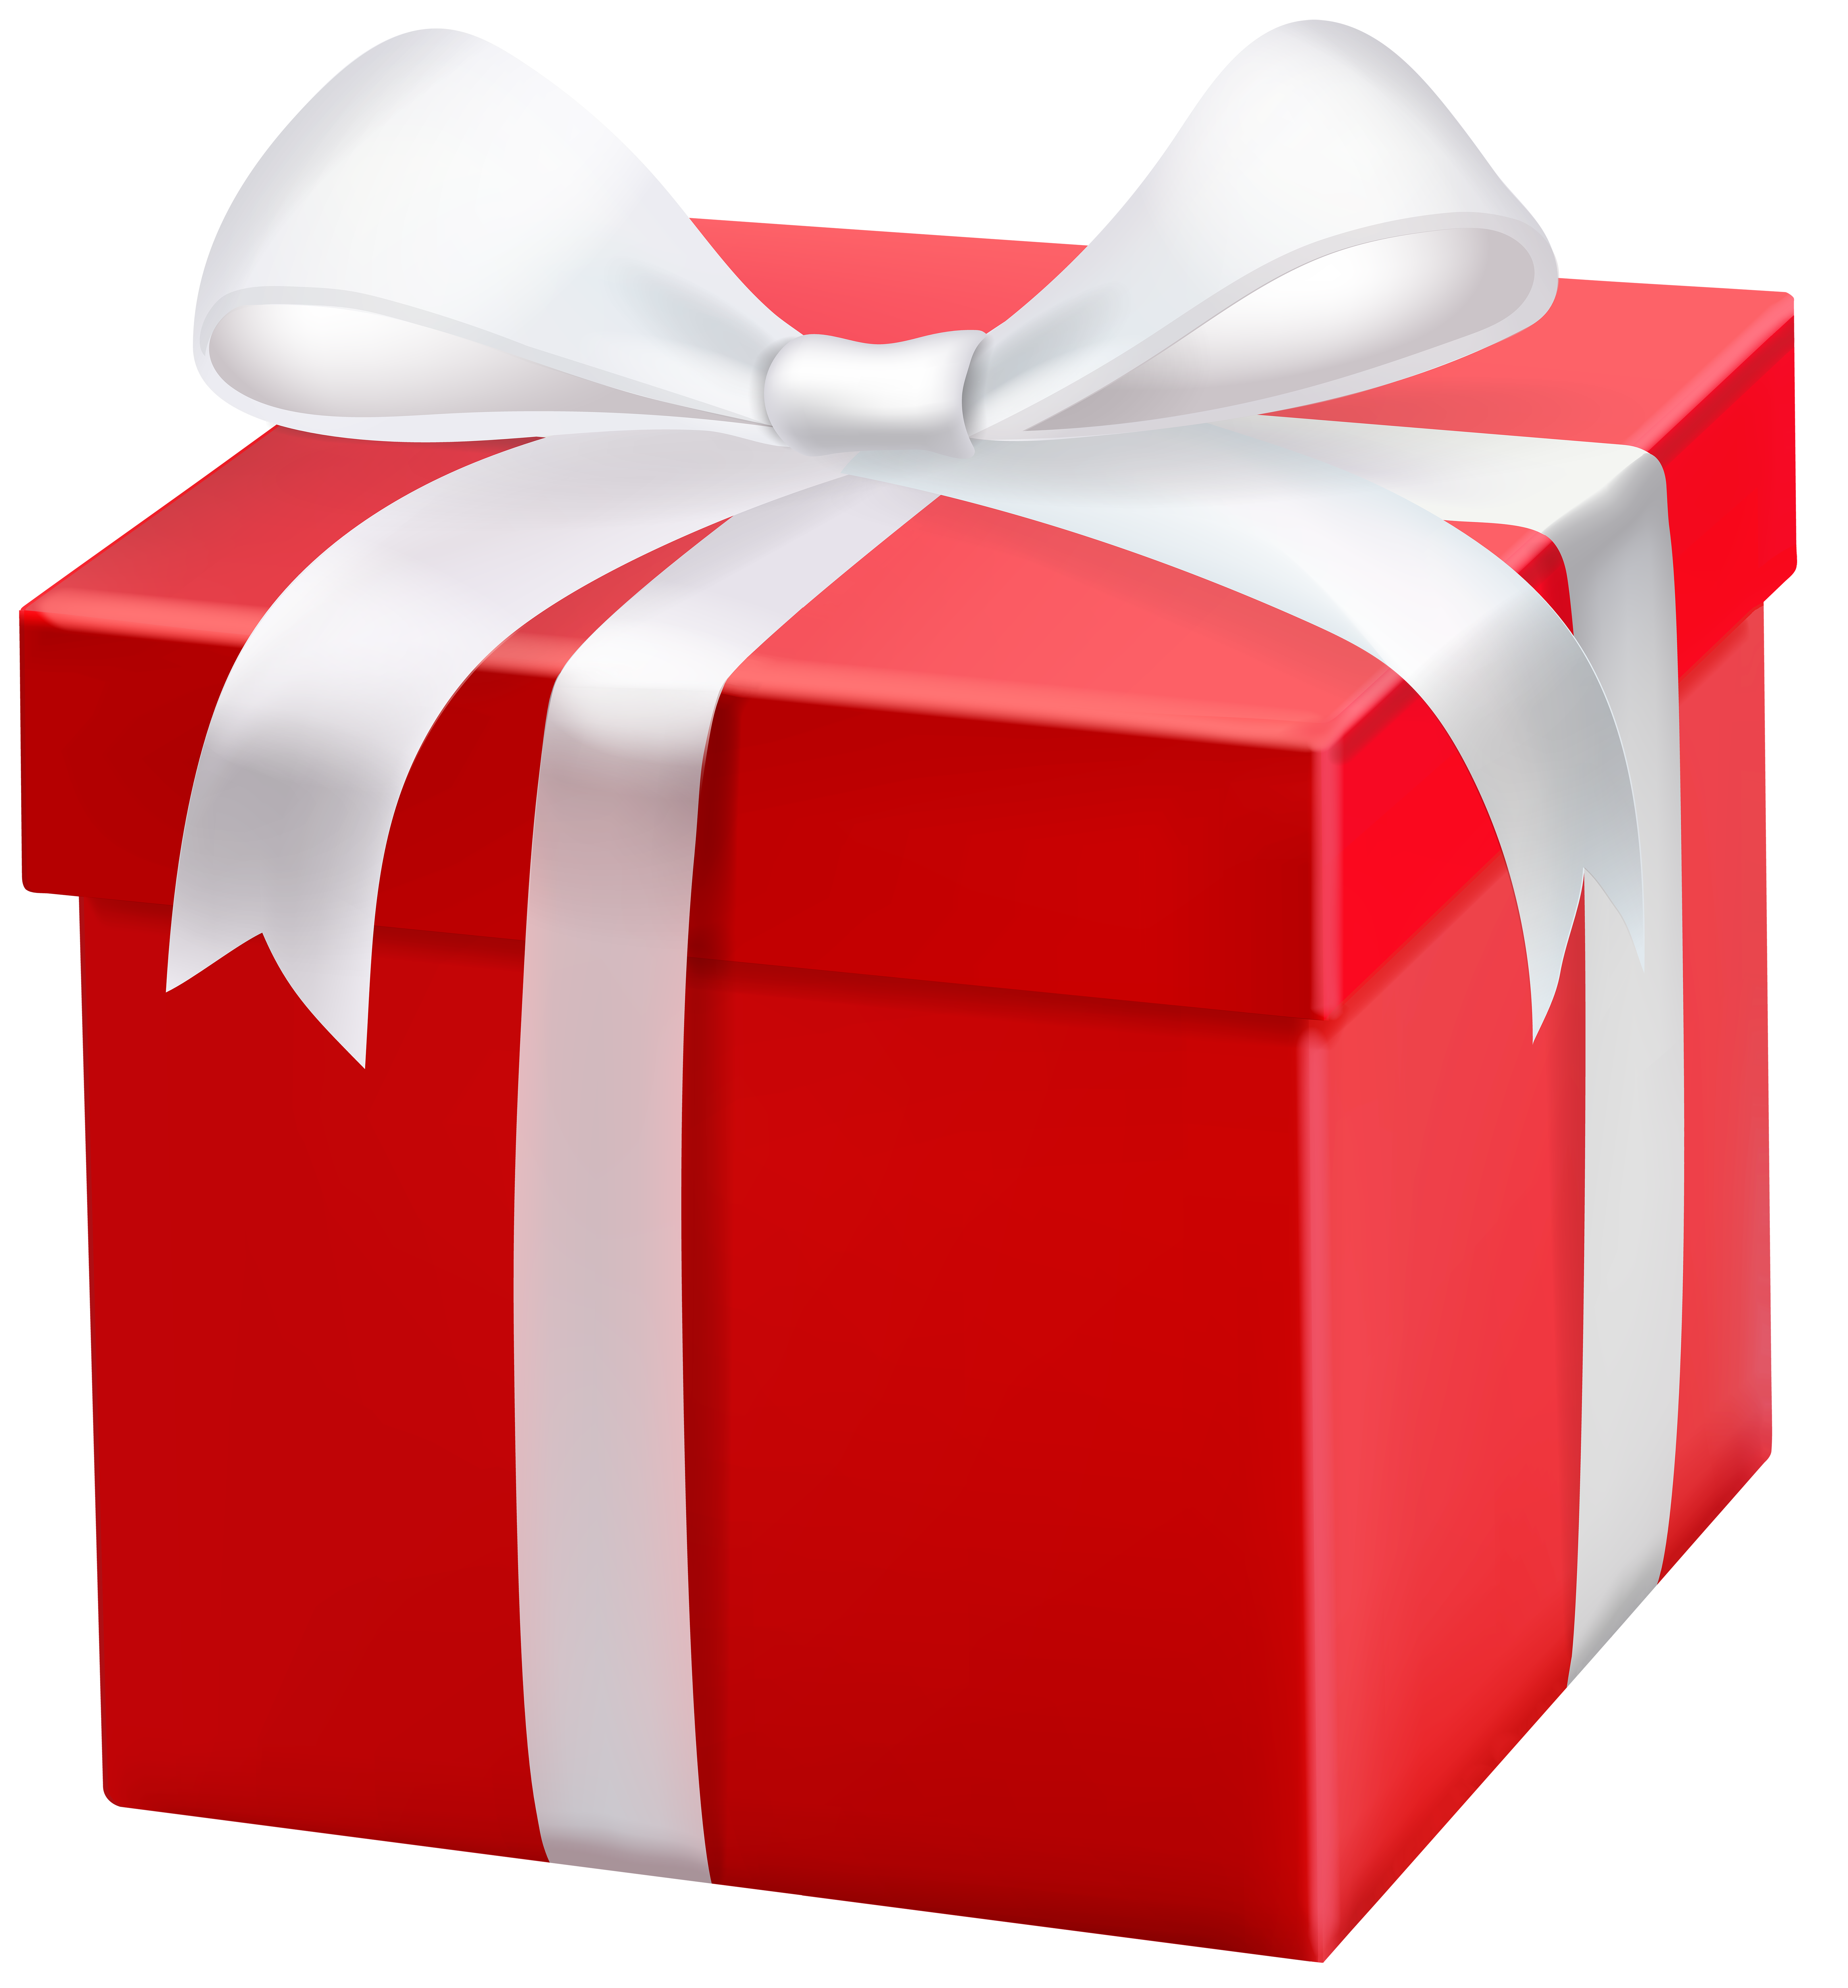 Red Gift Box Transparent Clip Art Image​ Gallery Yopriceville - High-Quality  Free Images and Transparent PNG Clipart, transparent gift